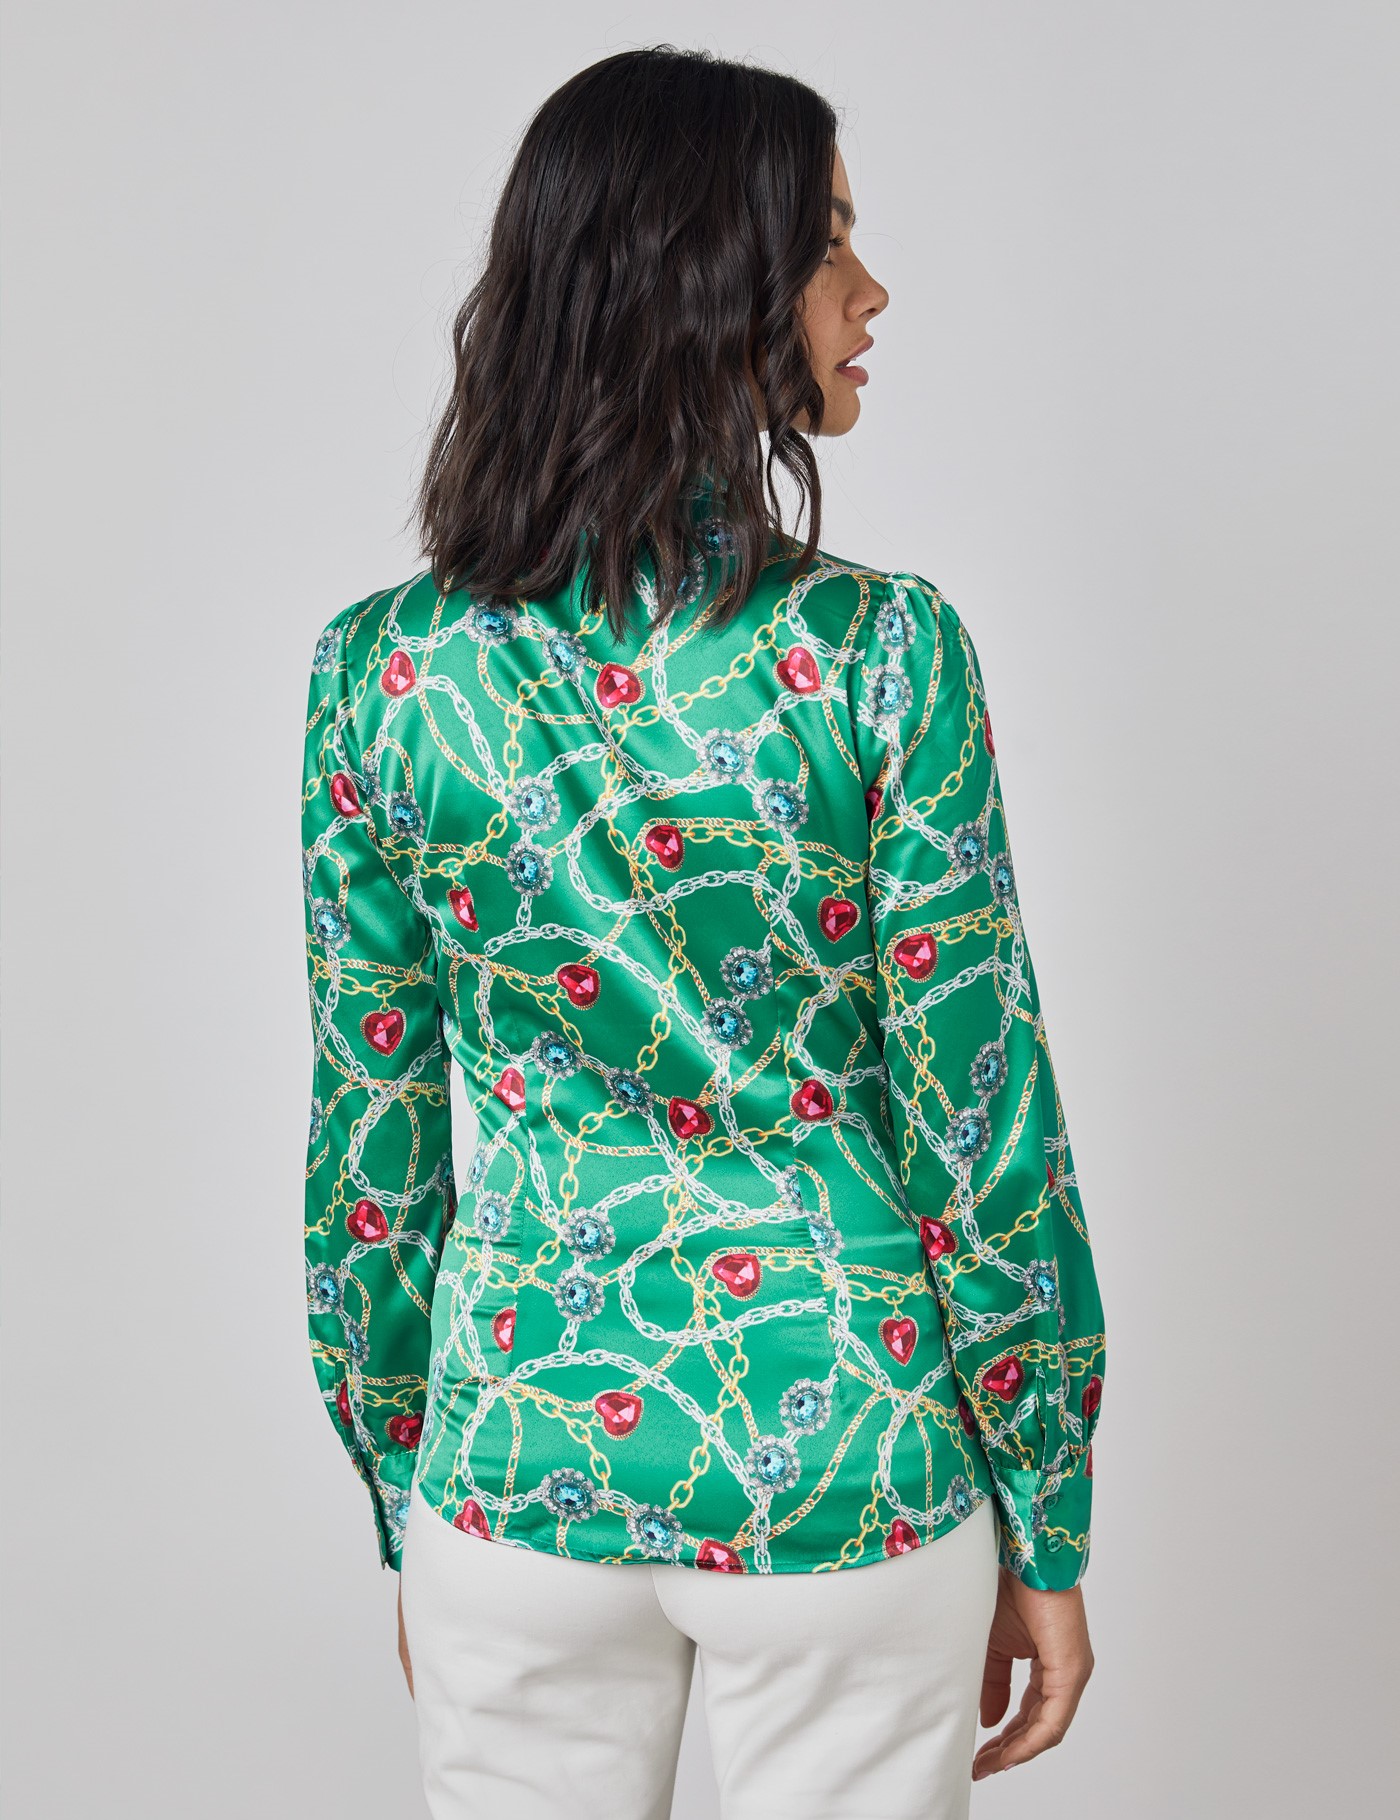 Print Fitted Women S Satin Blouse With Single Cuff In Green And Gold Pussy Hawes And Curtis Uk